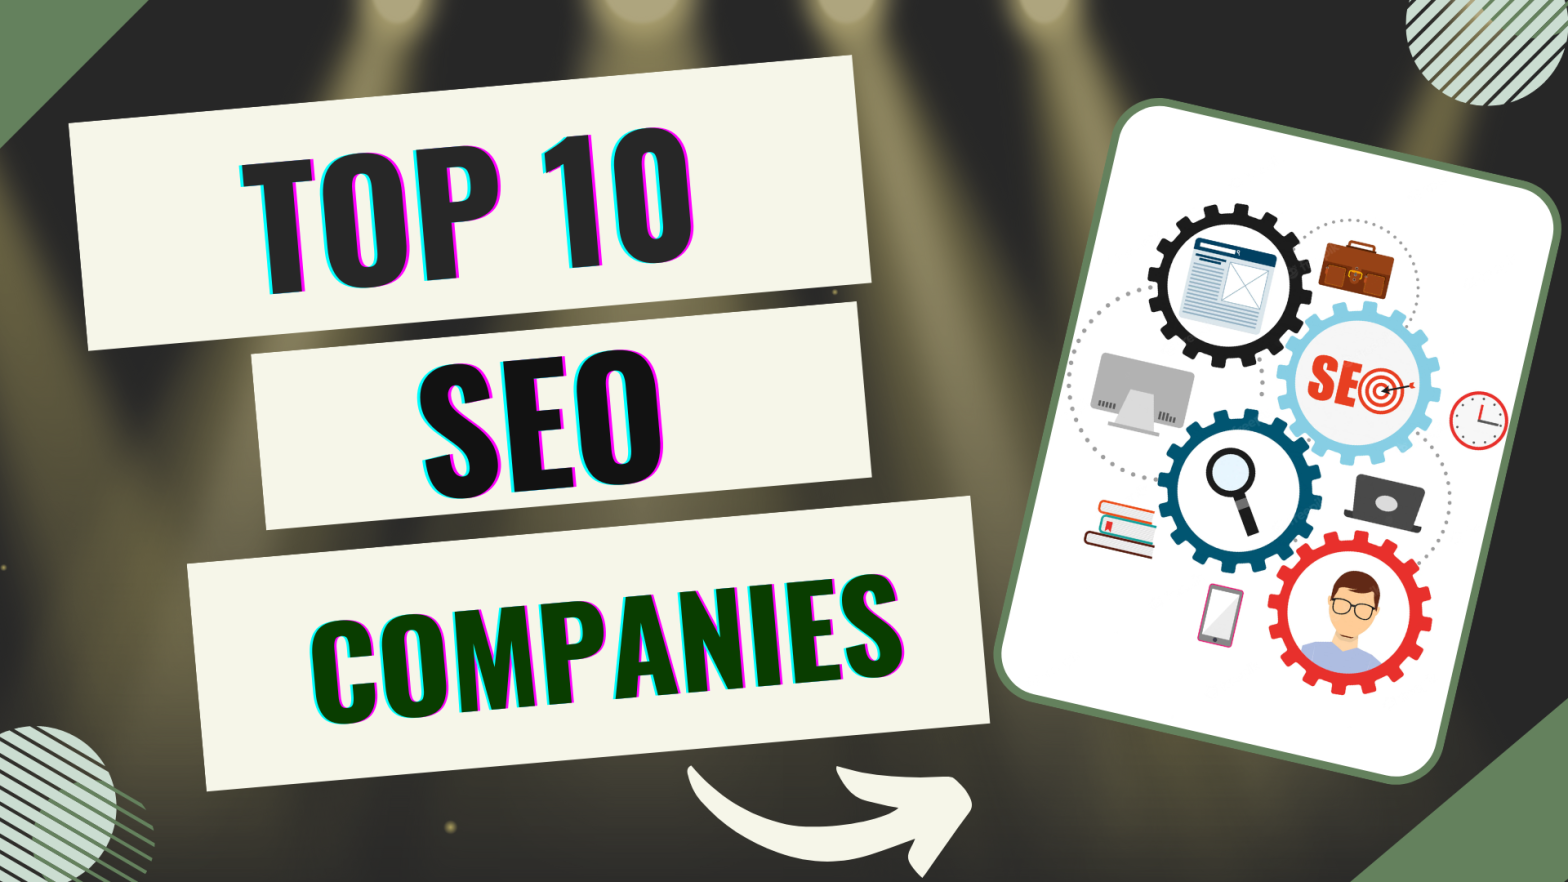 Top SEO companies featured image